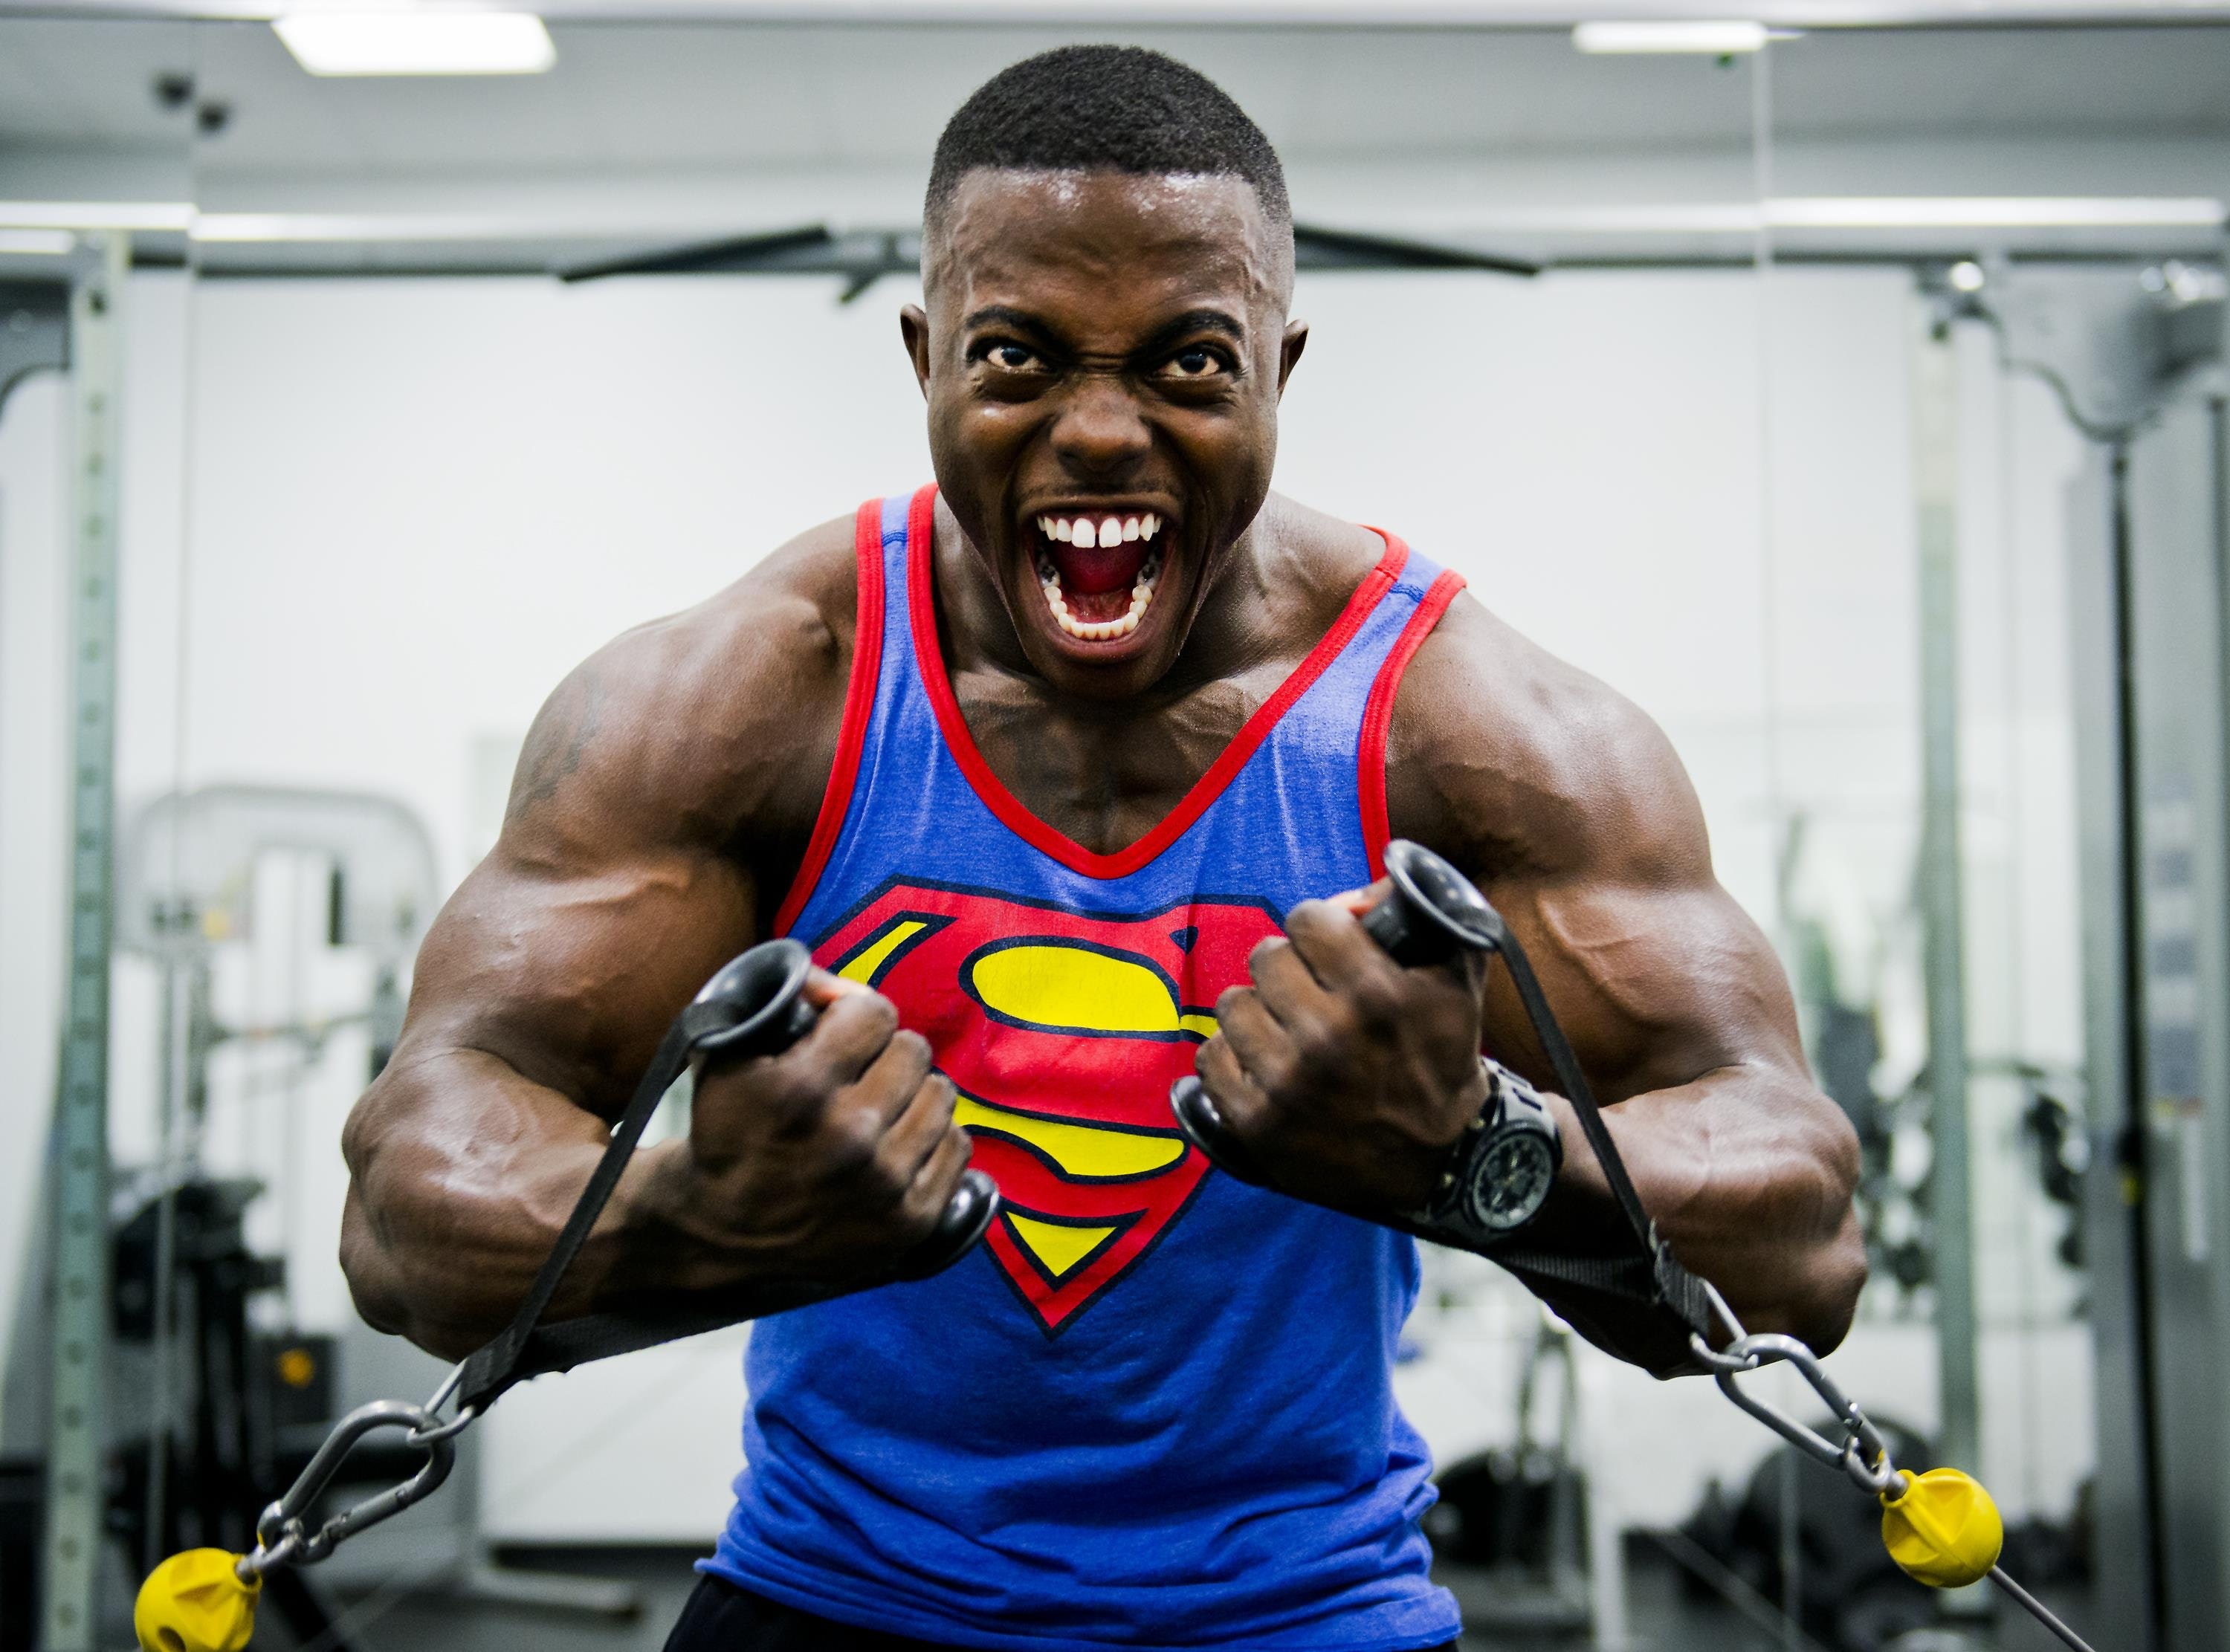 Blue and Red Superman Print Tank Top Shirt, Athlete, Weightlifting, Weight, Training, HQ Photo